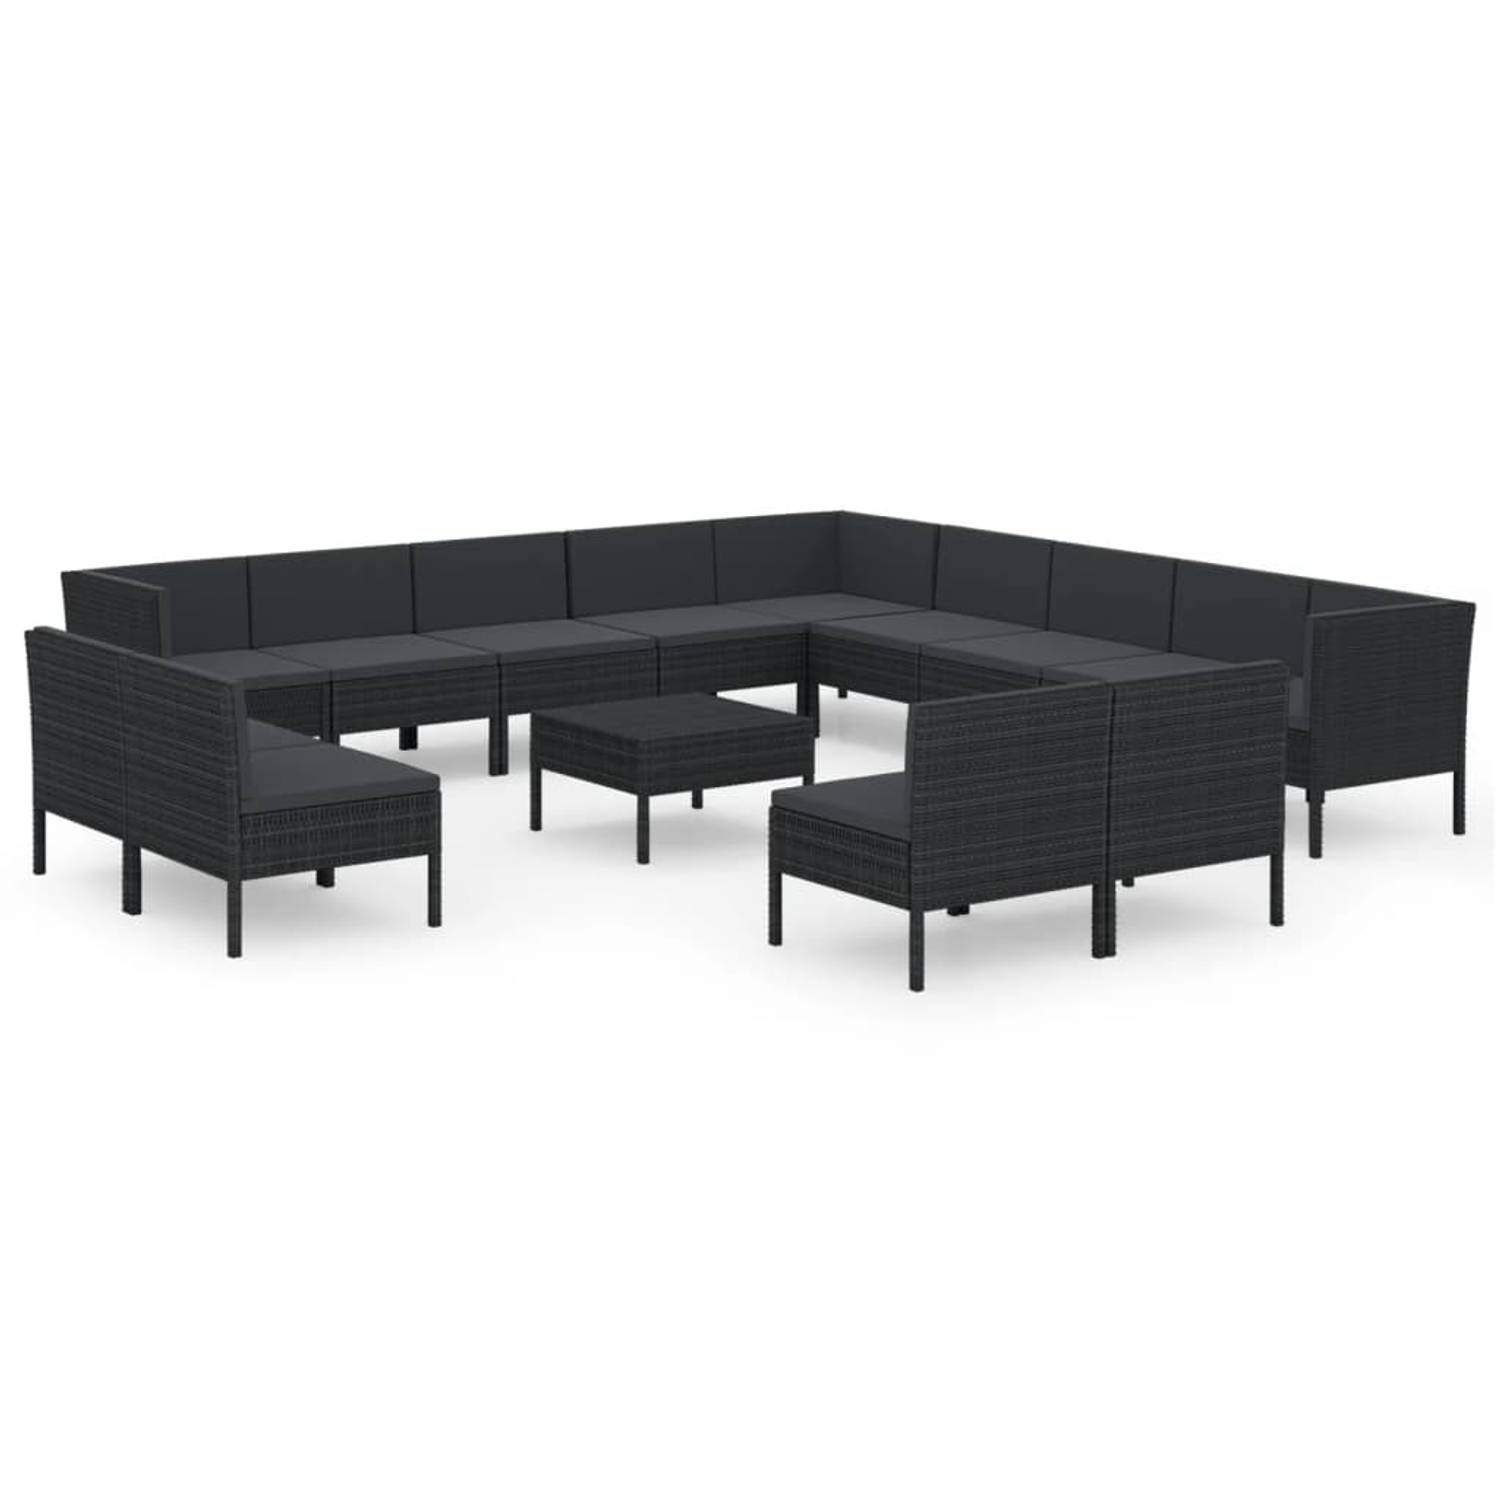 The Living Store Loungeset Modulaire Tuinmeubelset - 60 x 60 x 35 cm - Zwart